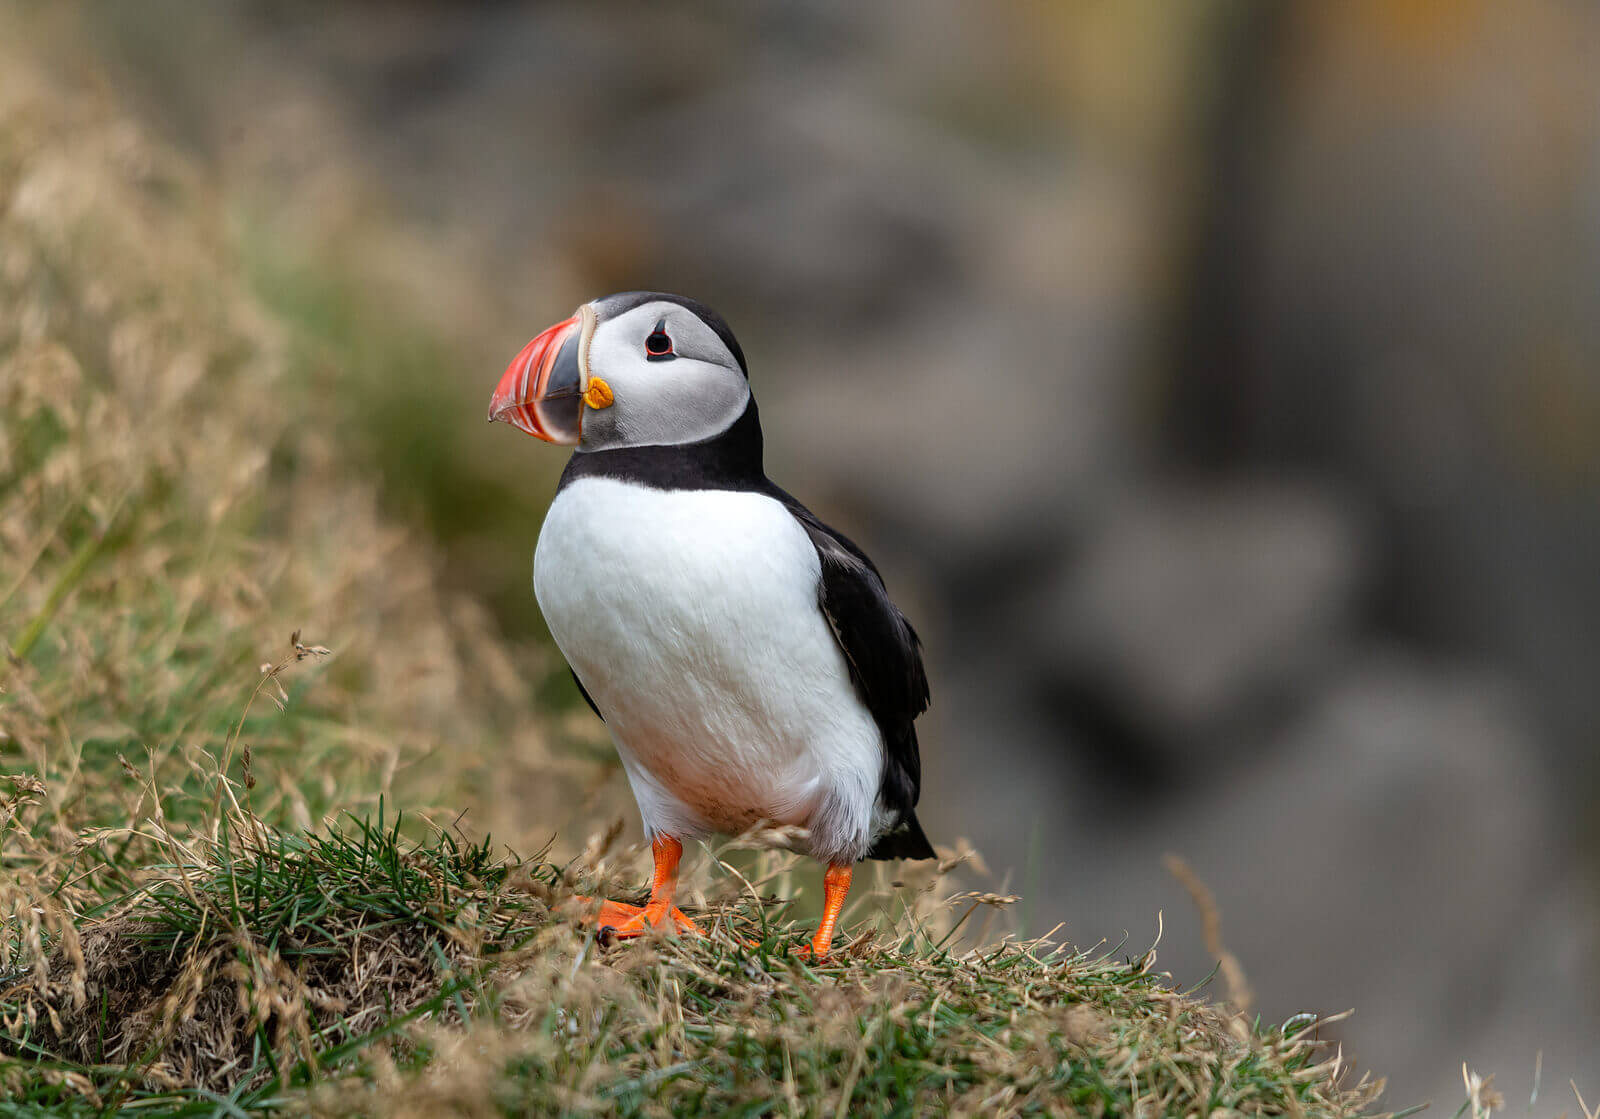 The Common Puffin returns to land to breed